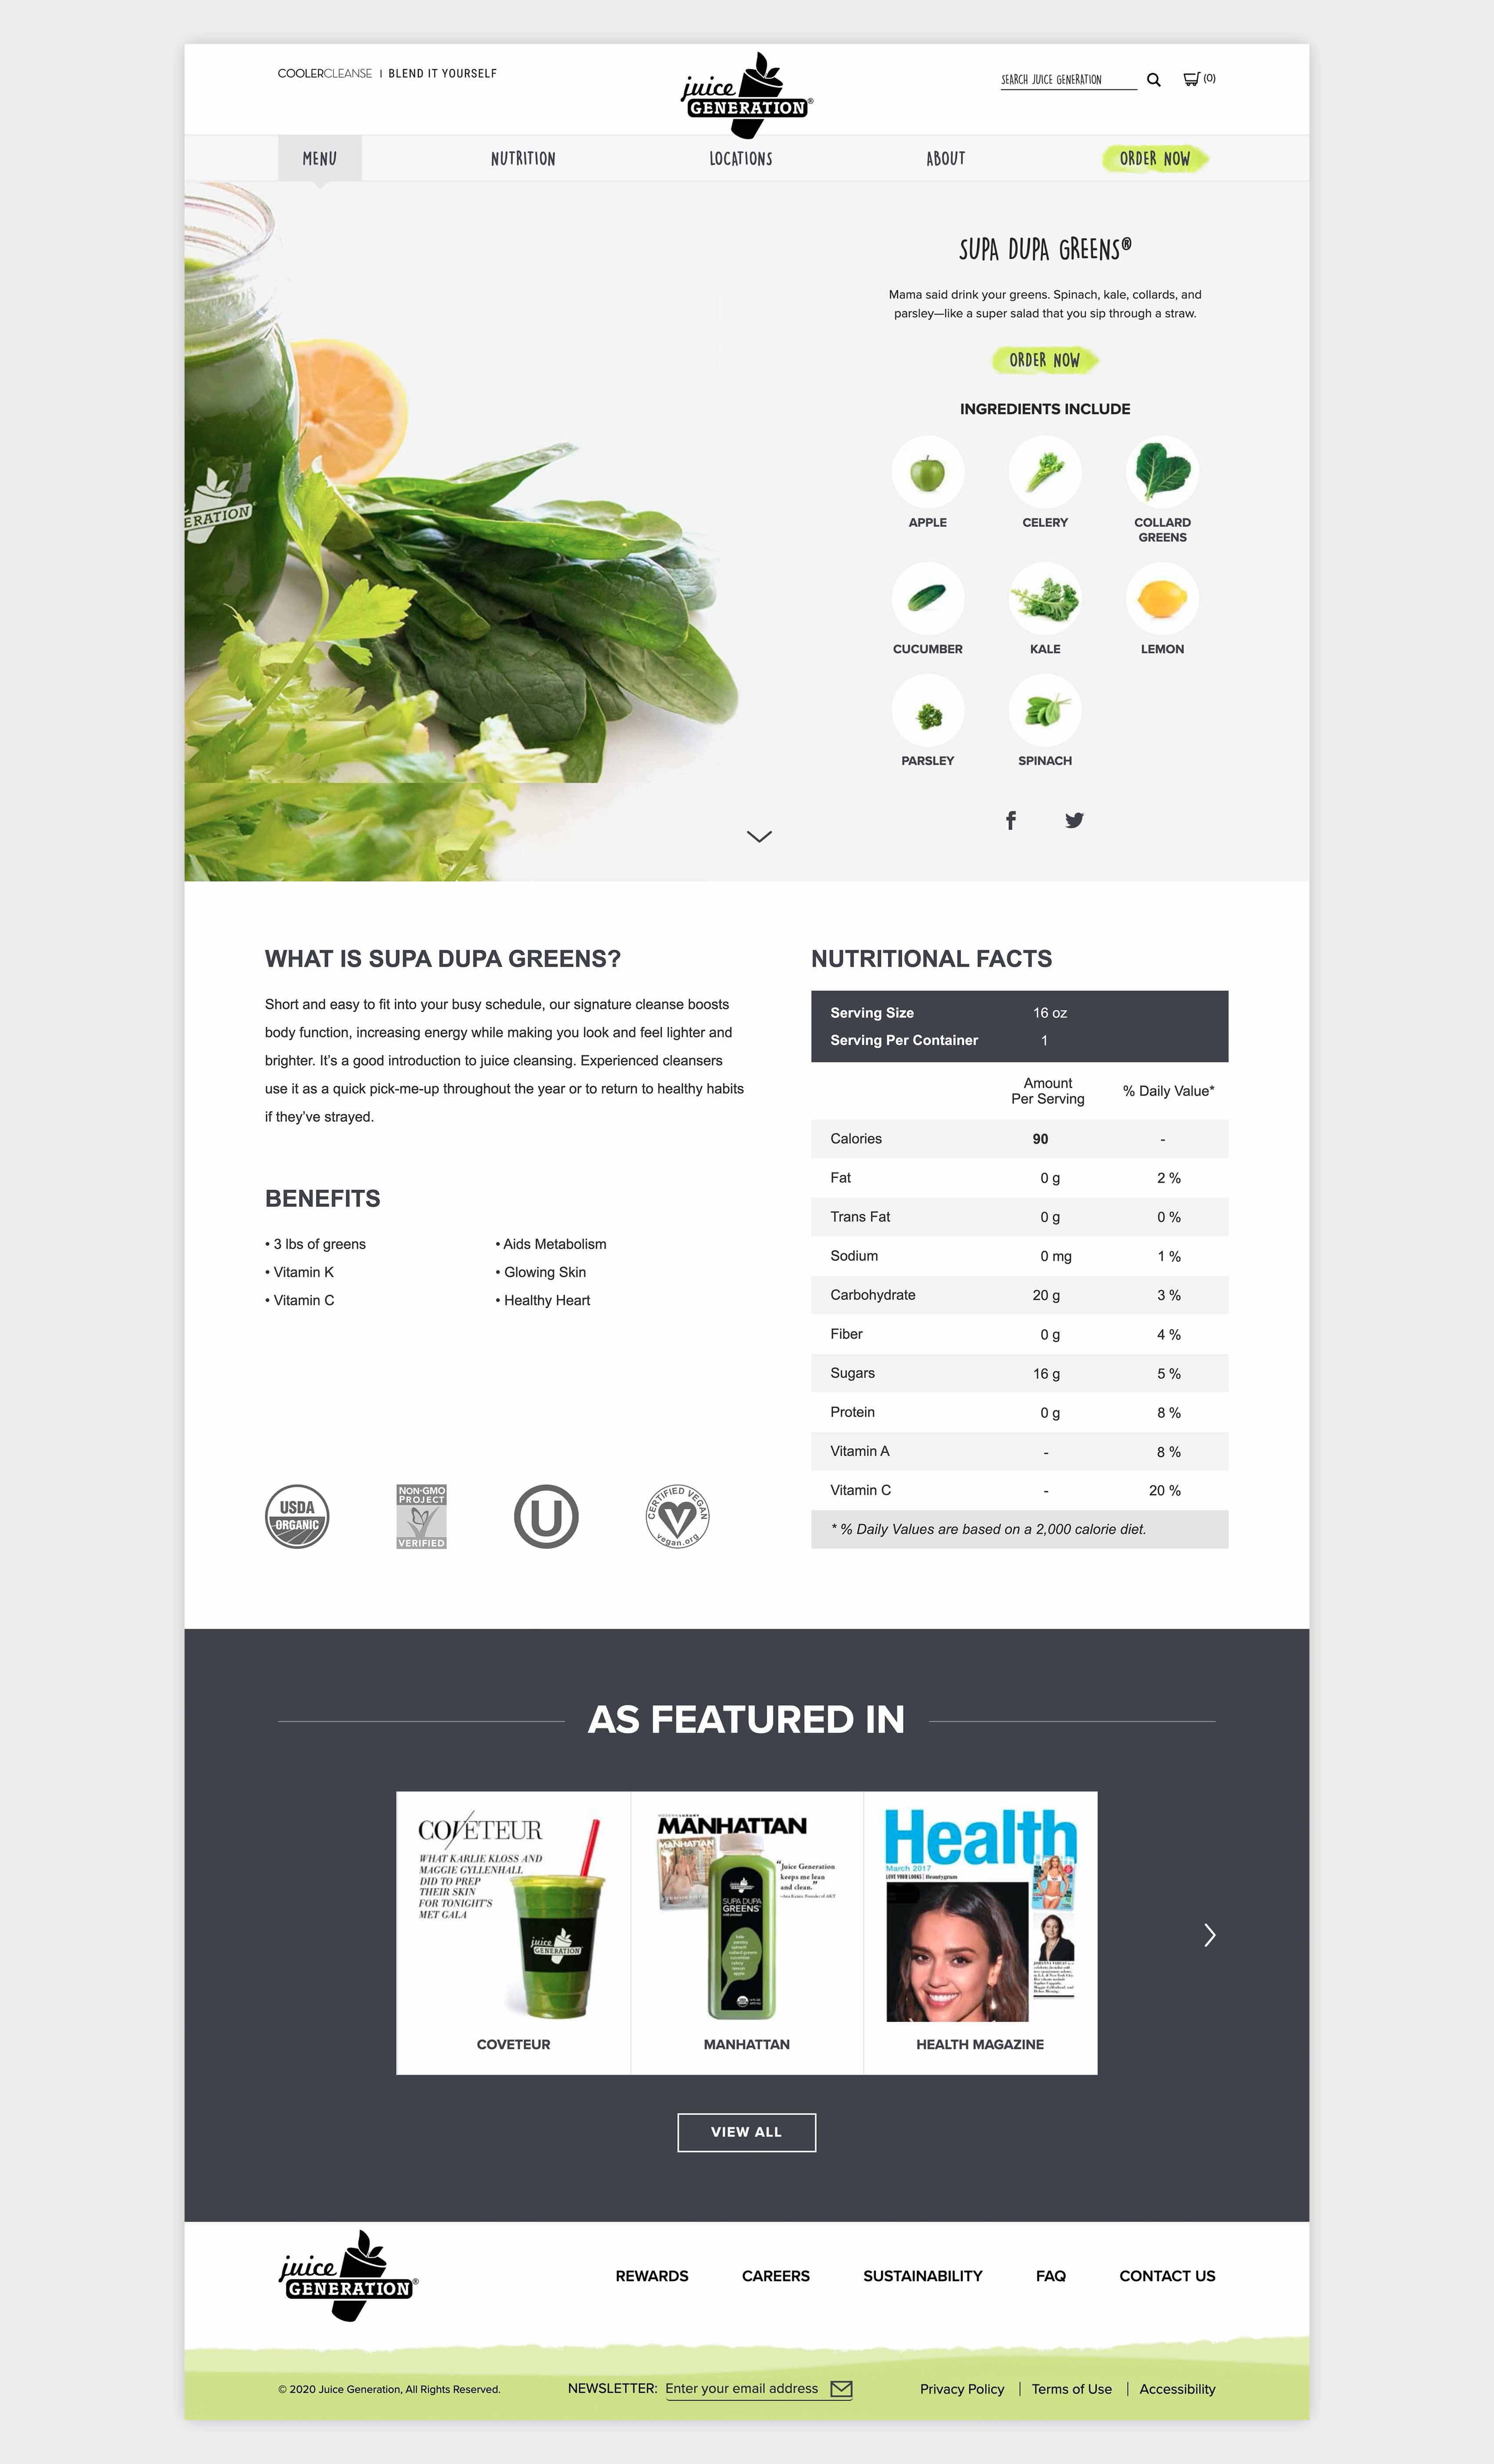 Product detail page with icons for ingredients and certifications, as well as entire nutritional facts table.